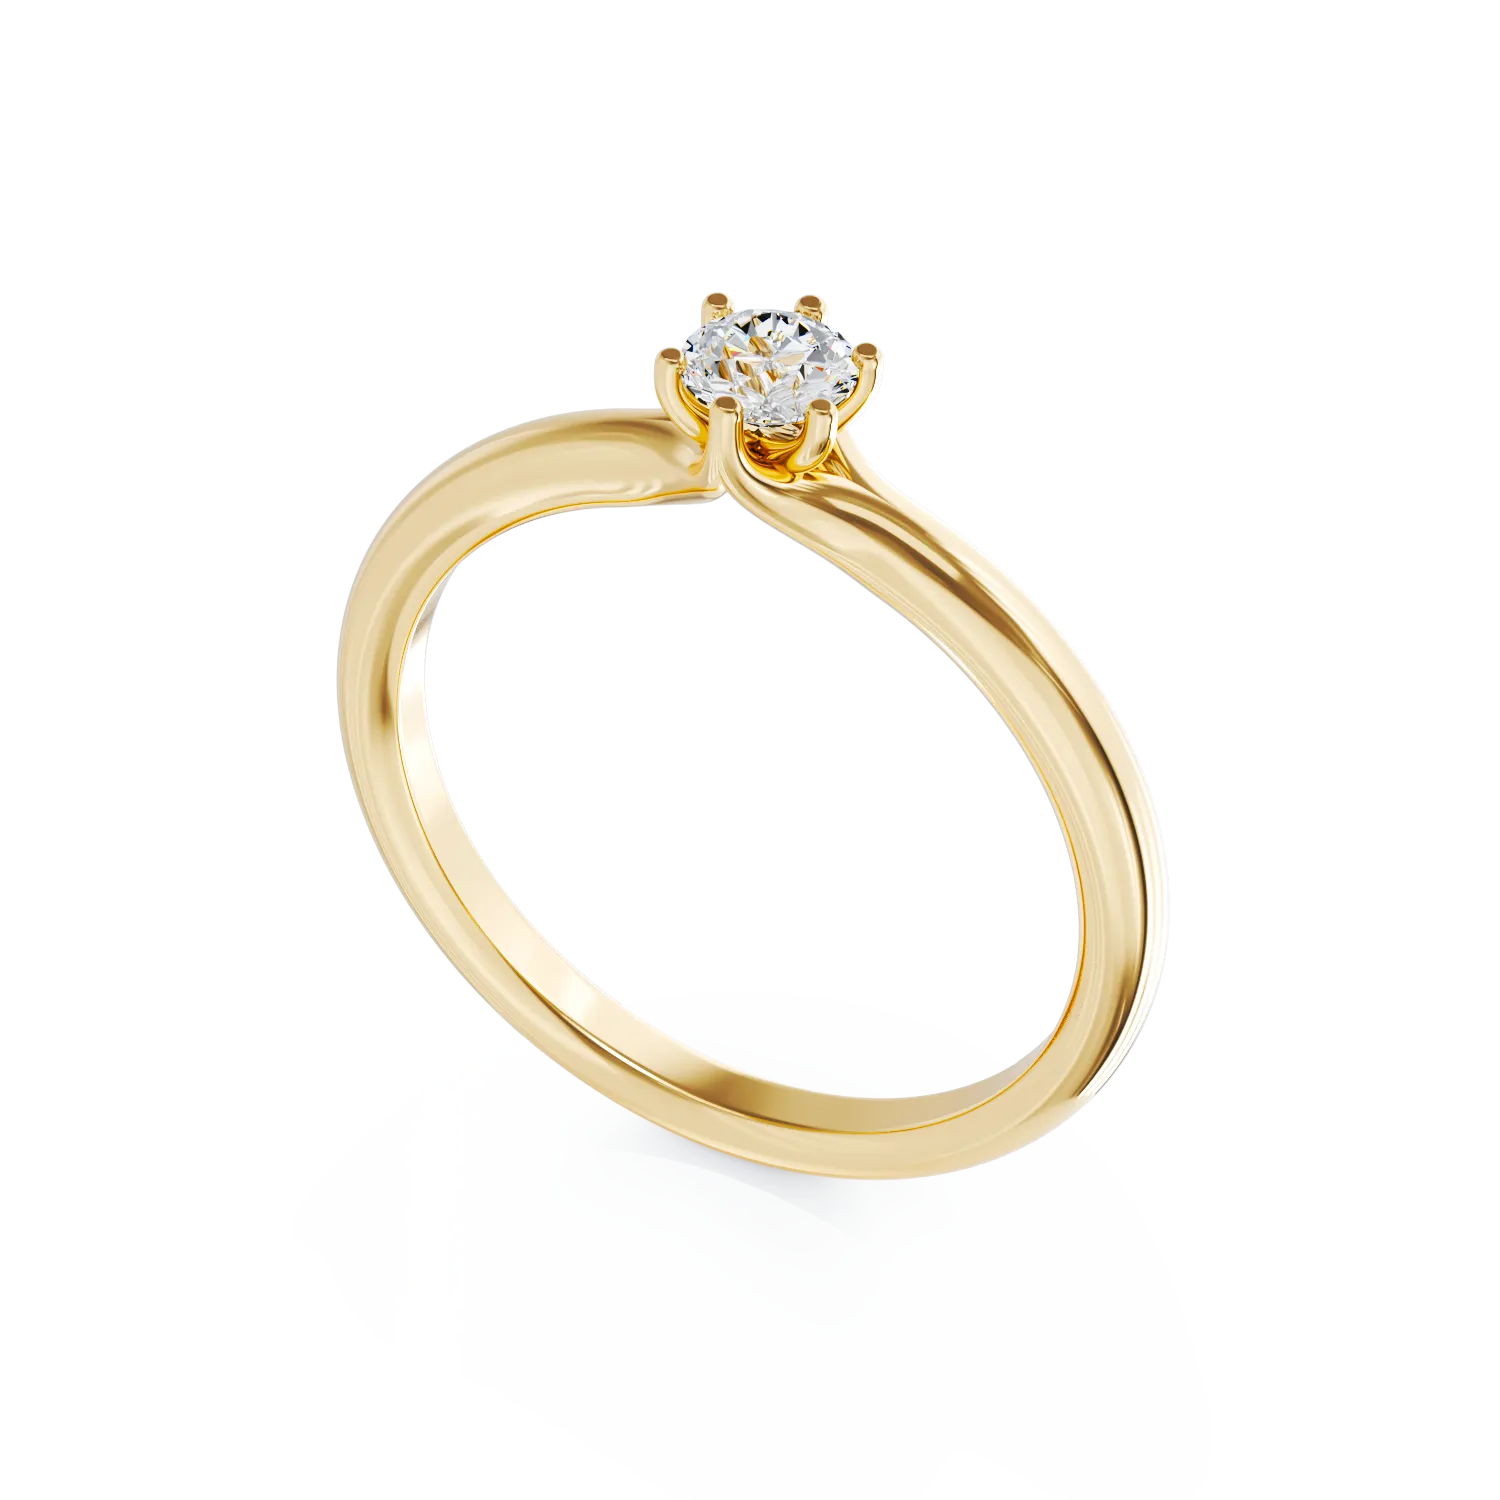 18K yellow gold engagement ring with a 0.24ct solitaire diamond